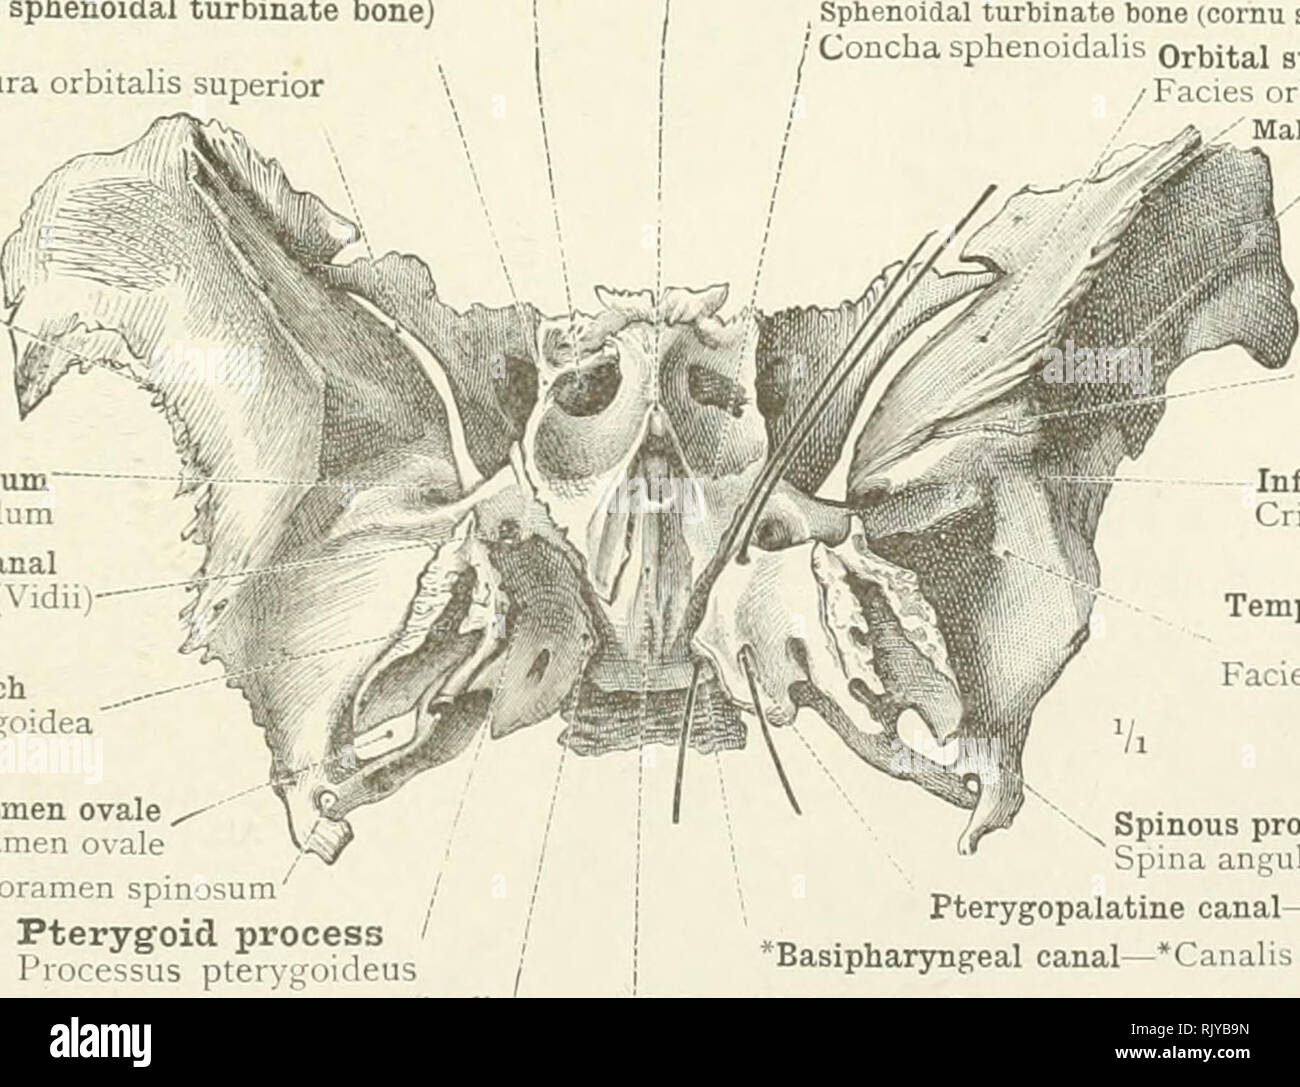 . An atlas of human anatomy for students and physicians. Anatomy. Spinous process Spina angularis Posterior or petrous border Margo petrosus f the sphenoid bone  Carotid groove Sulcus caroticus Frontal border Margo frontalis Sphenoidal fissure Fissura orbitalis superior Great wing —External or squamous border Margo squamosus Foramen rotundum Foramen rotundum Foramen ovale Foramen ovale Foramen spinosum Foramen spinosum Lingula of the sphenoid Lingula sphenoidalis Fig. 118.—The Sphenoid Bone seen from Above (Cerebral Aspect). Sphenoidal foramen Apertura sinus sphem Orbital border (of the sphen Stock Photo